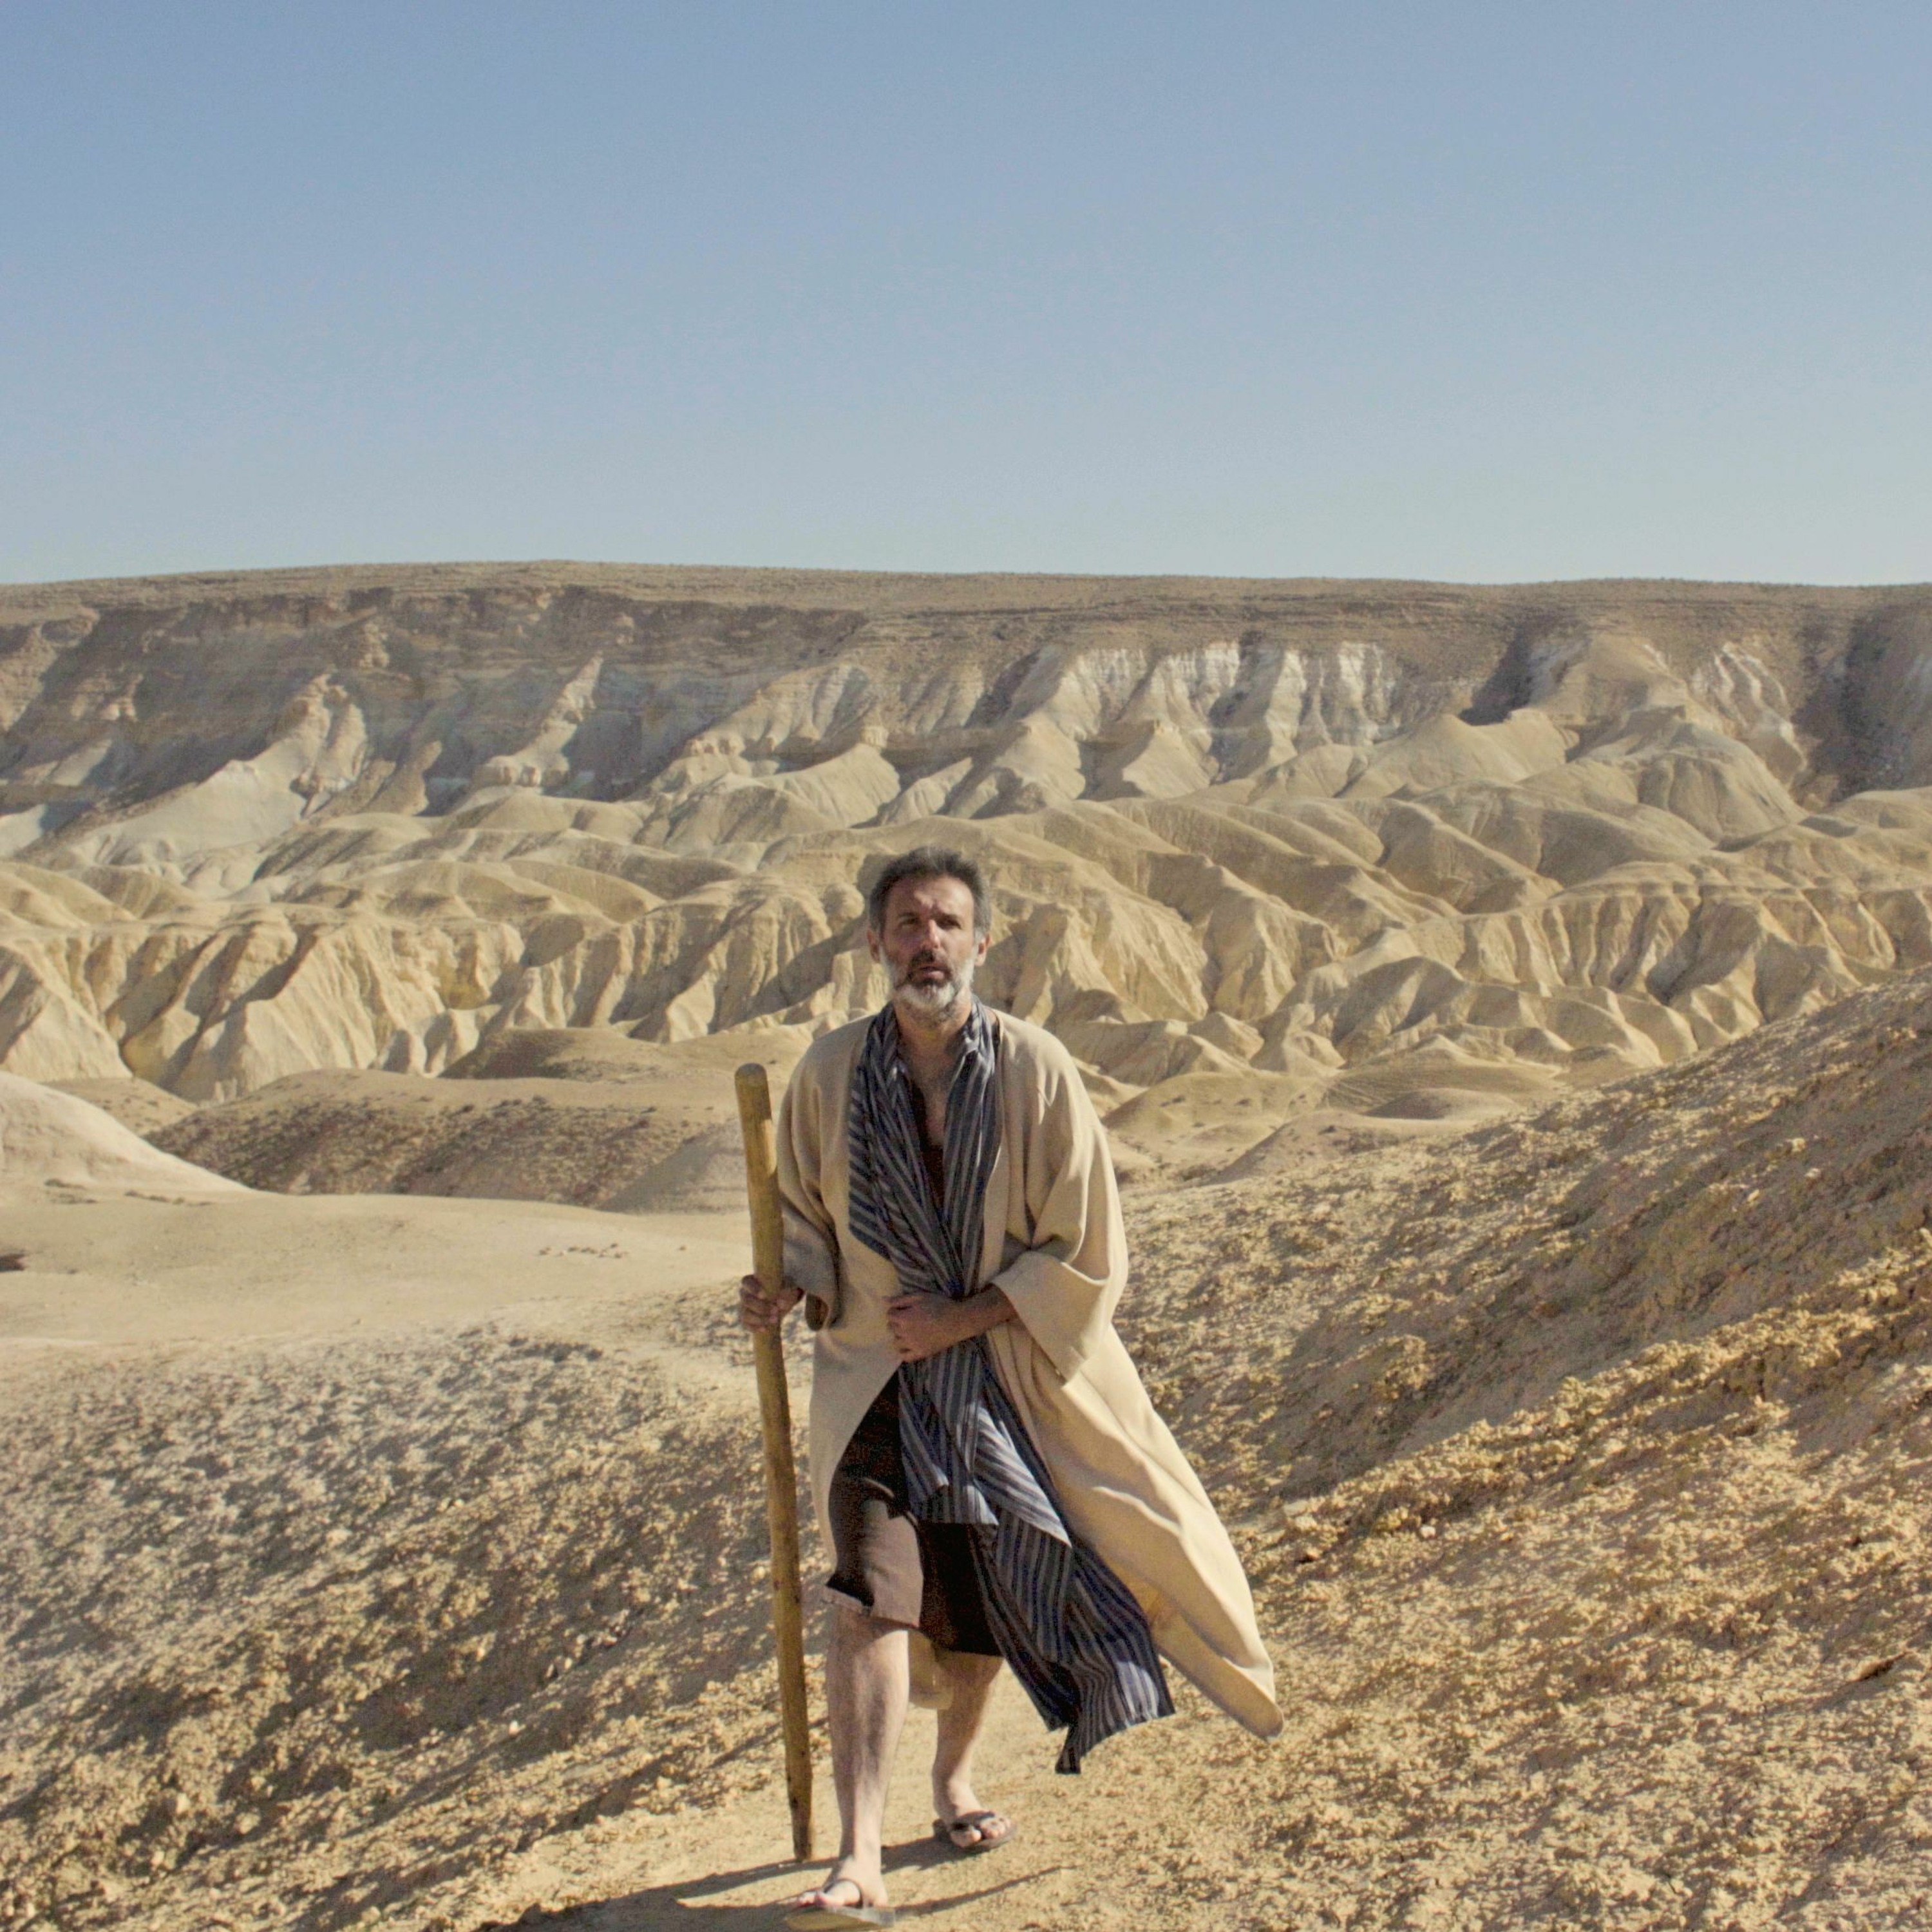 Documentary director Igal Hecht takes the Bible into 'The Wilderness' in new 10-part series